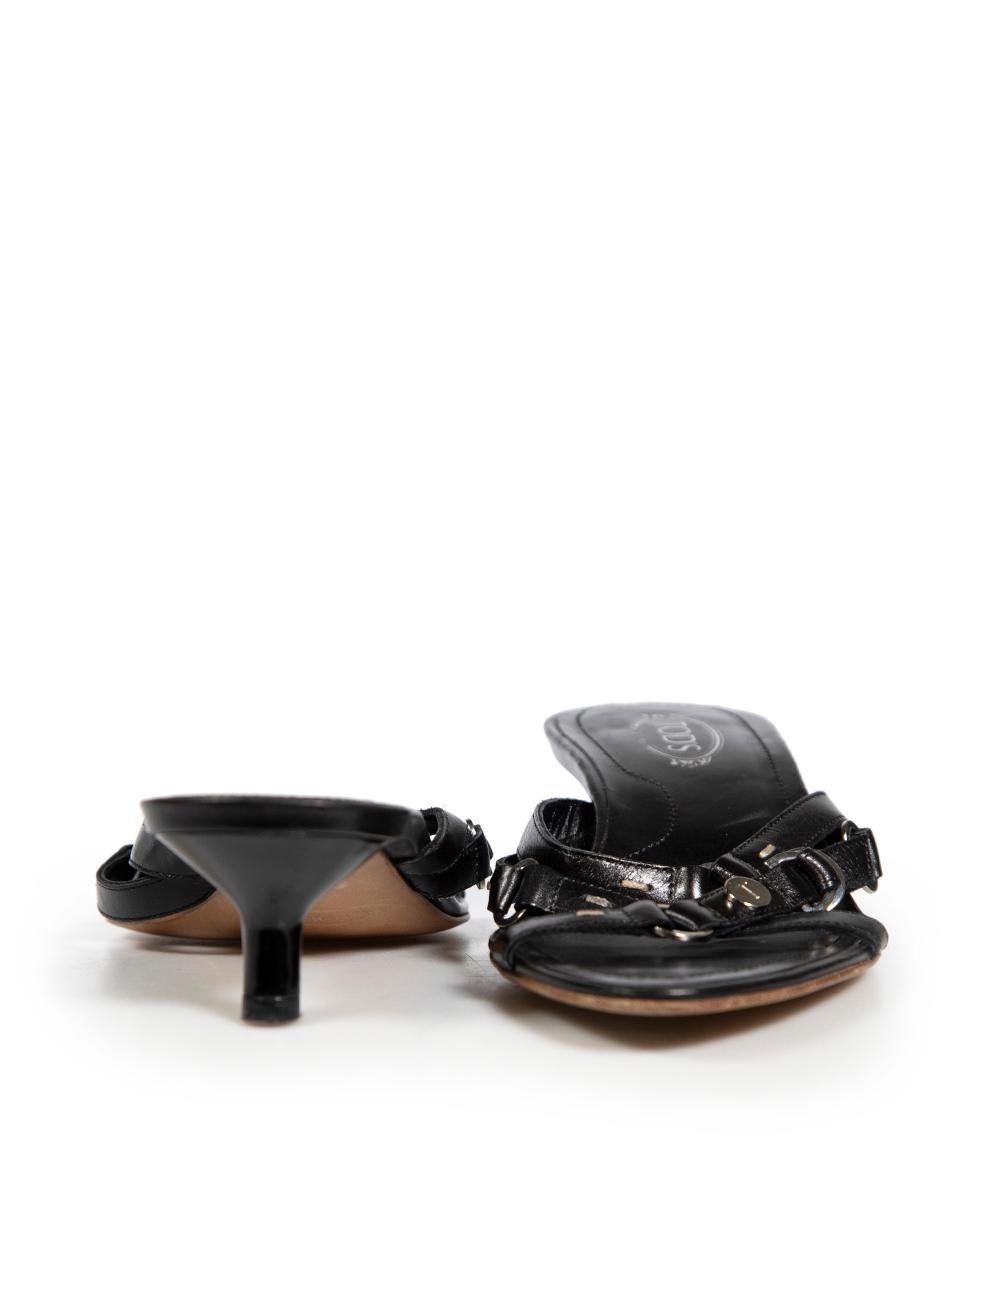 Tod's Black Leather Kitten Heeled Sandals Size IT 35 In Good Condition For Sale In London, GB